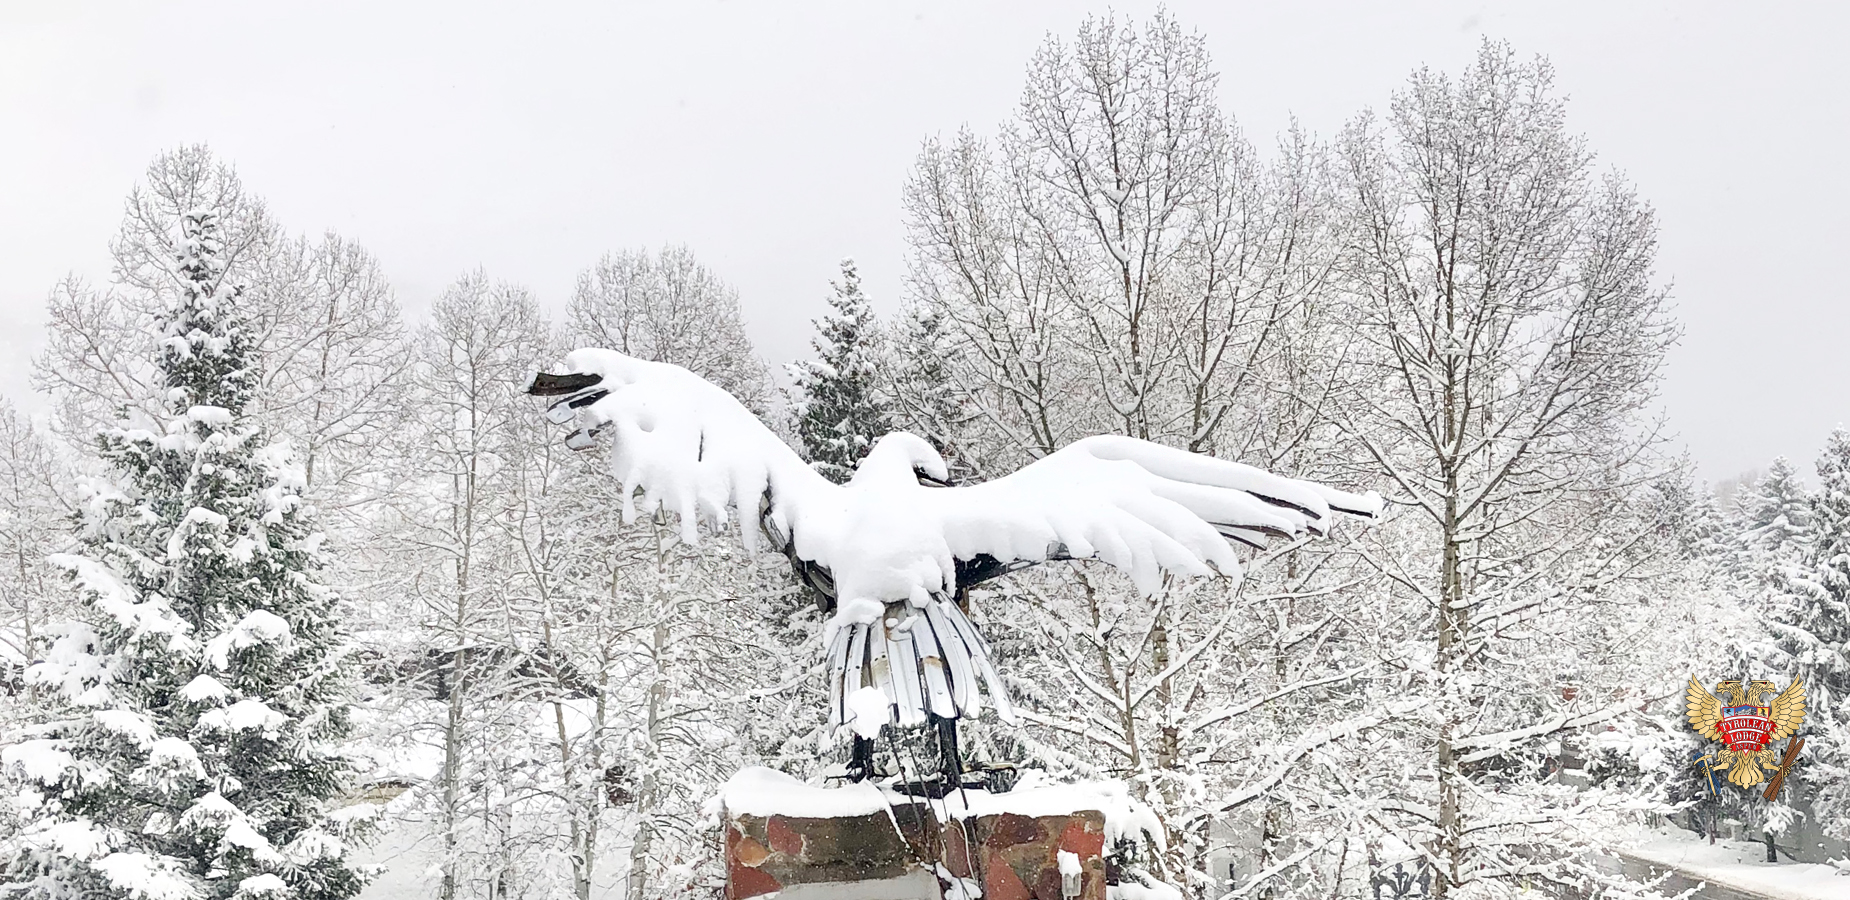 A blanket of snow on the sentinel eagle signifies the return of winter